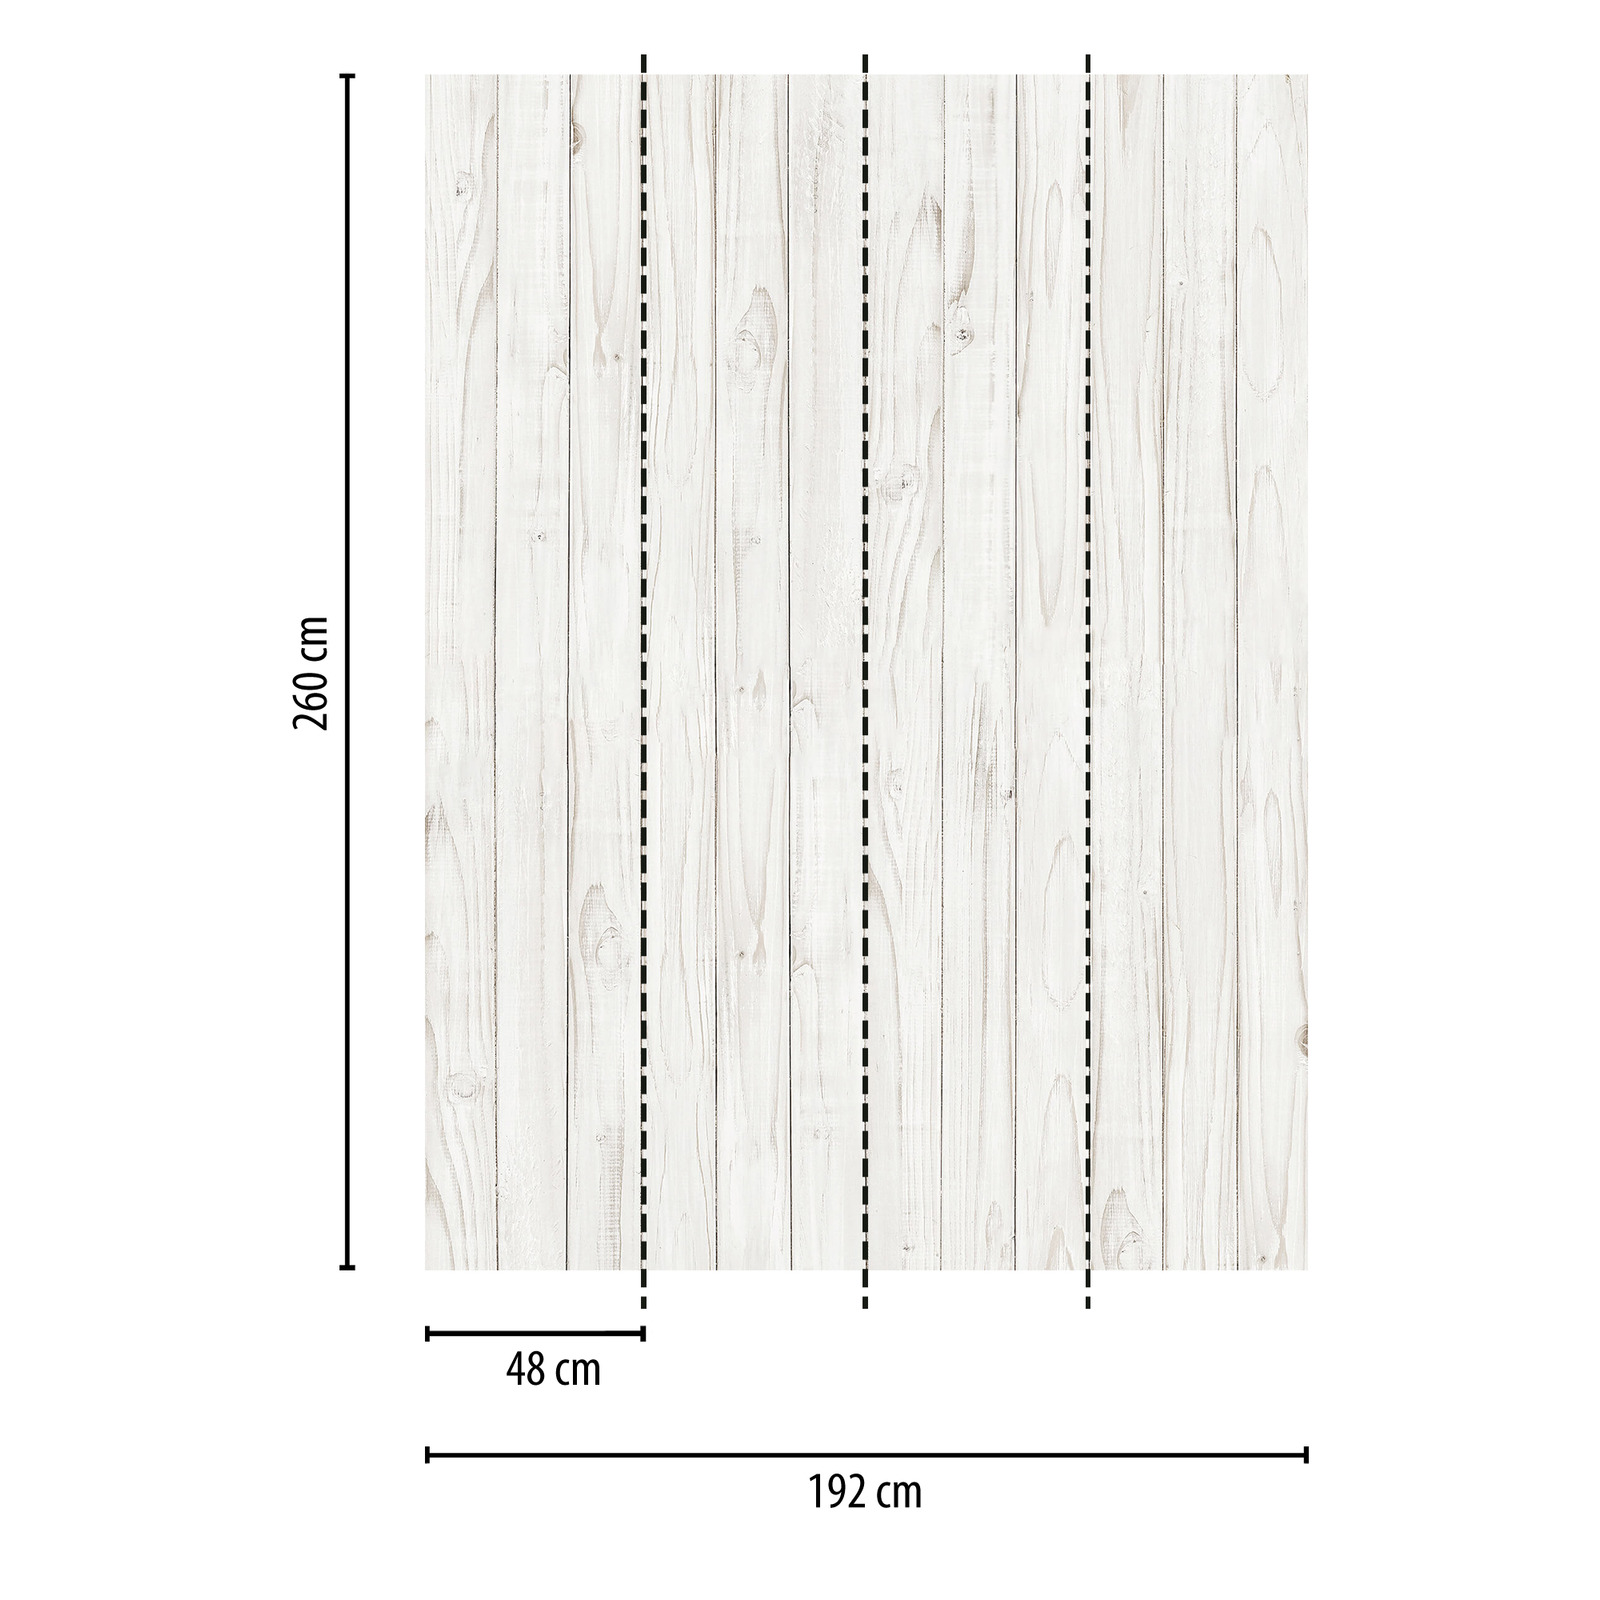             Photo wallpaper 3D wood look wall - white, grey
        